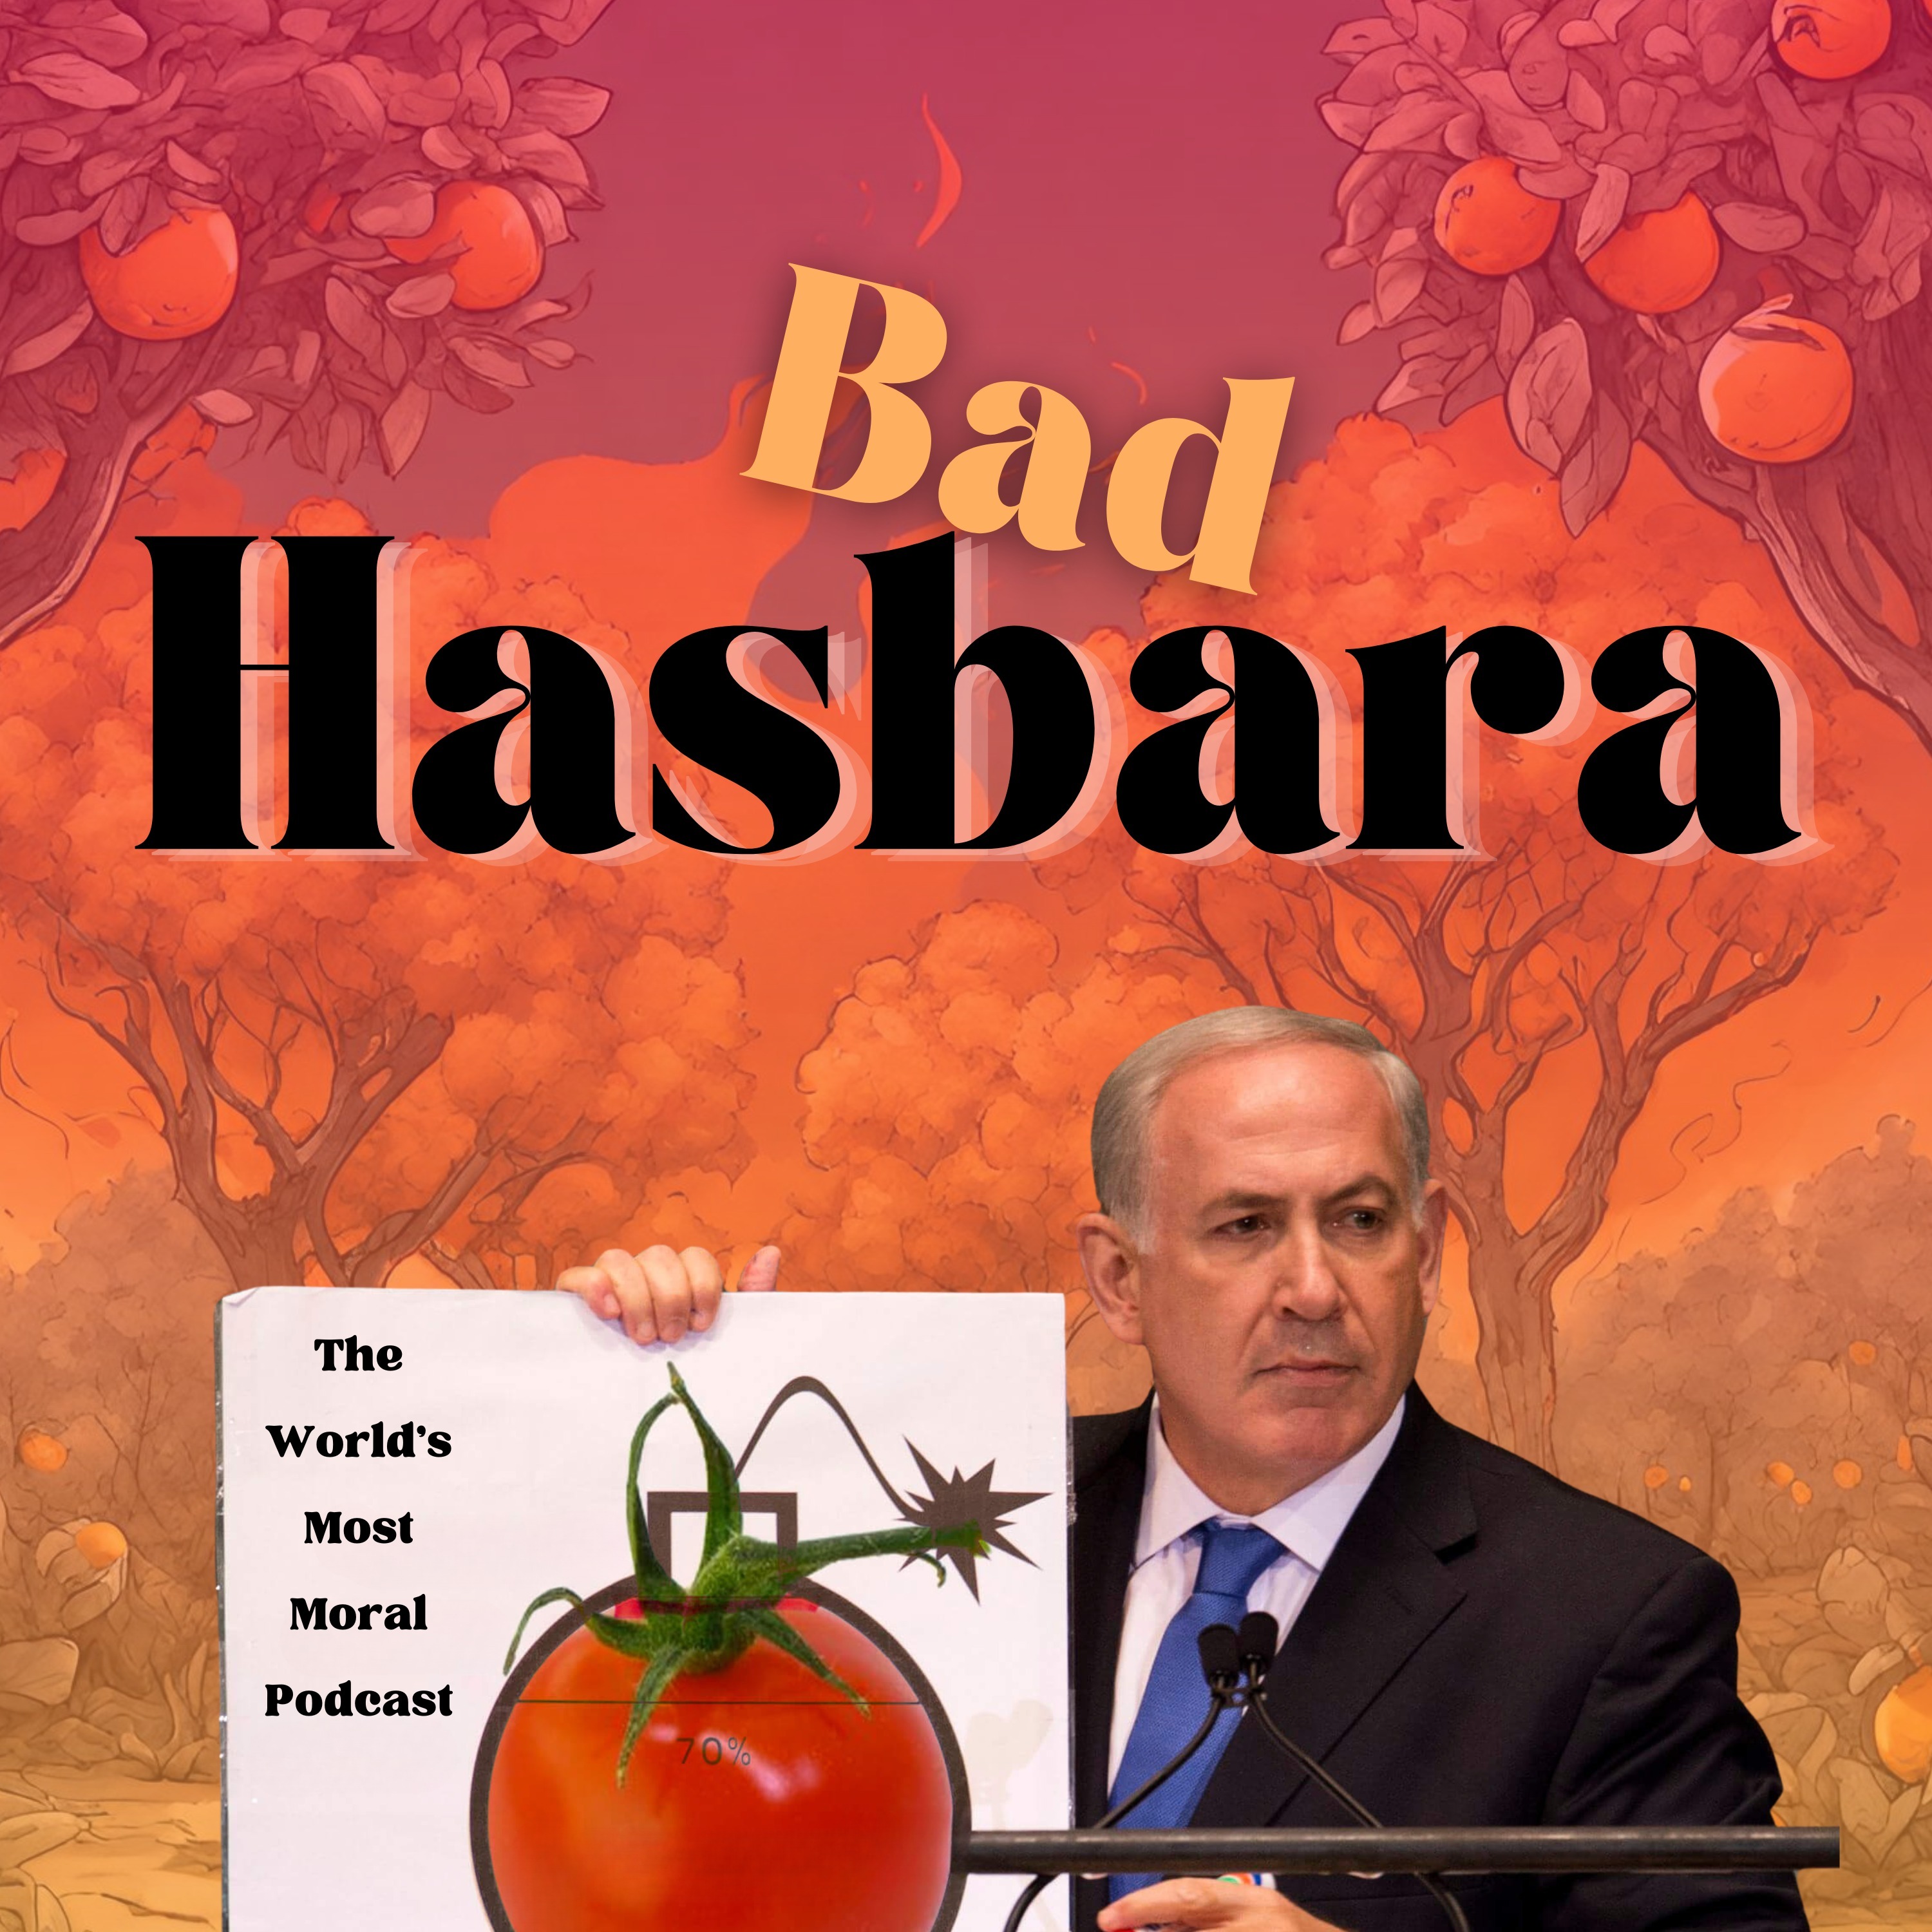 Bad Hasbara - The World's Most Moral Podcast cover art